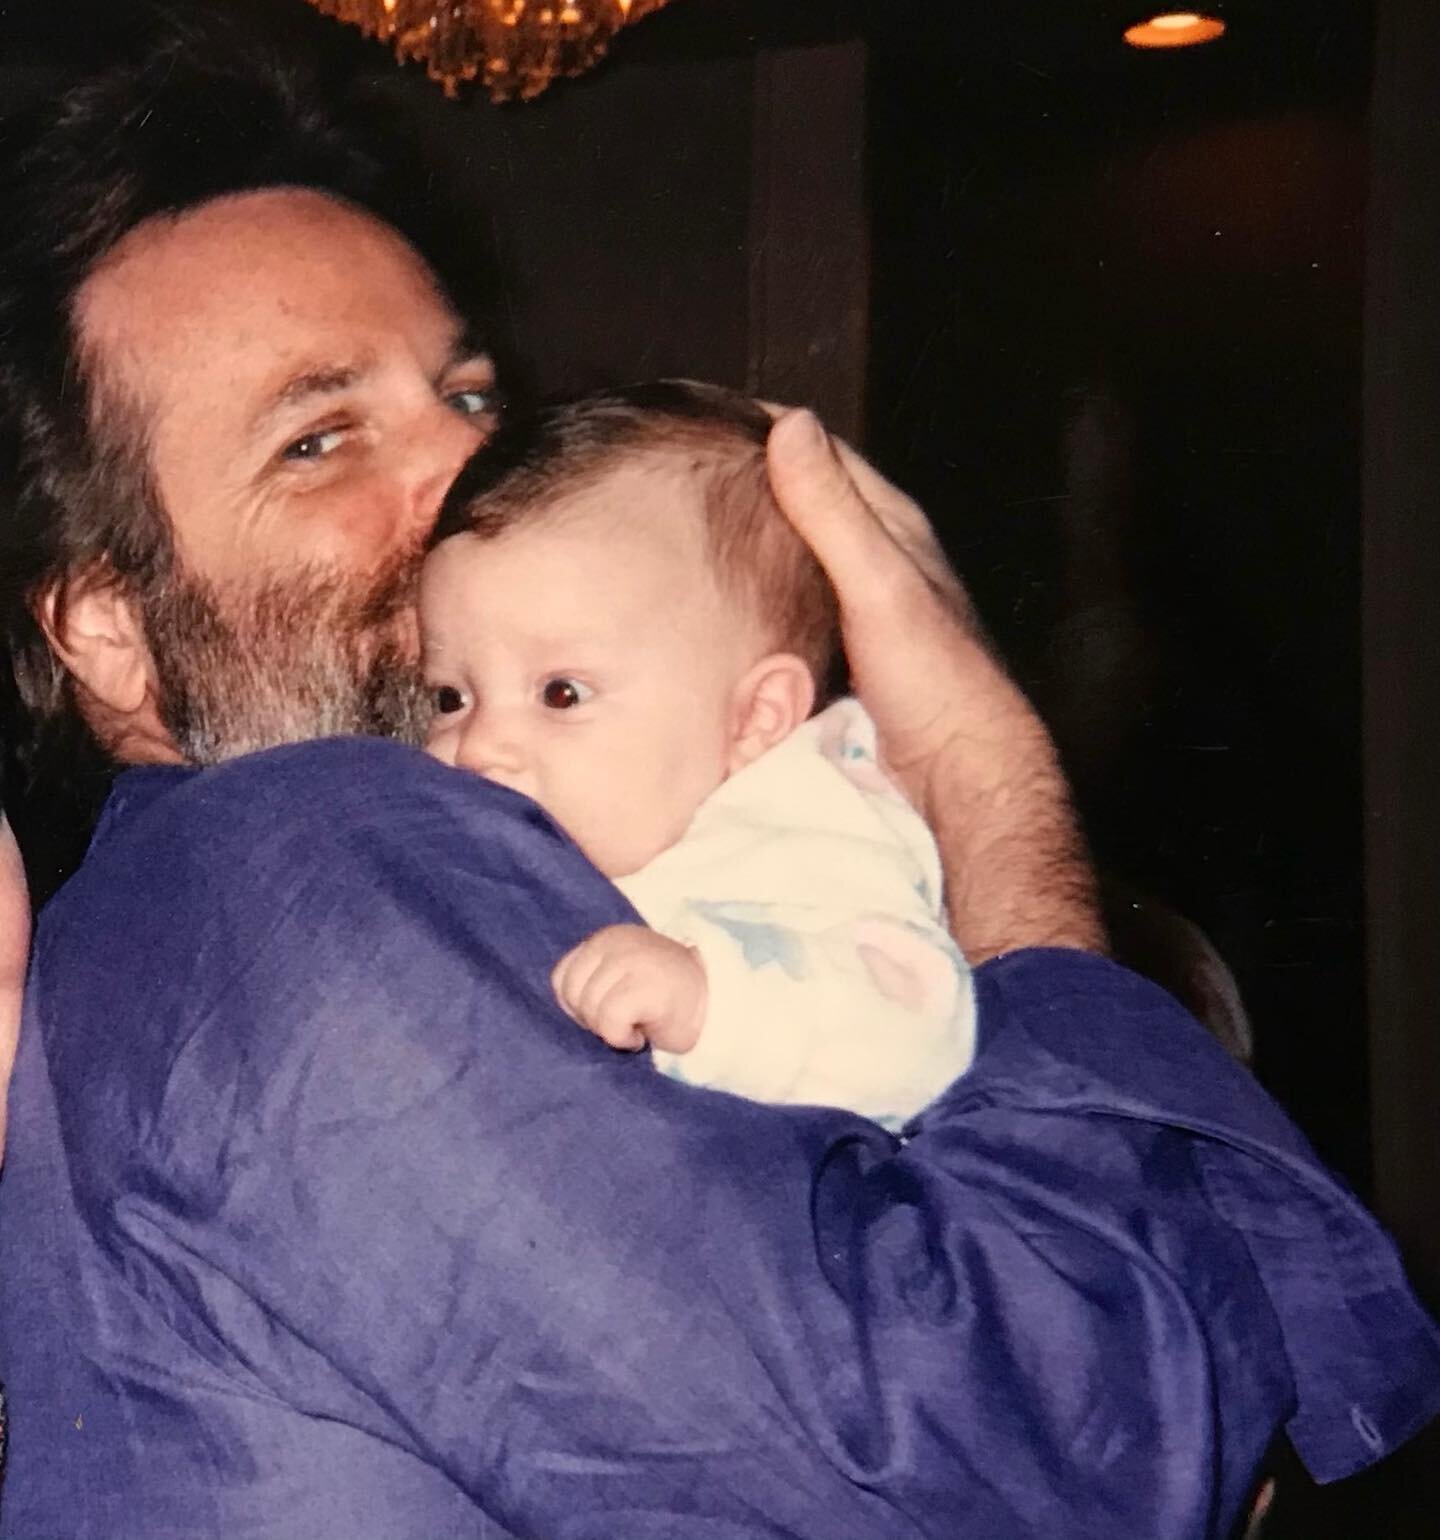 The Great Carl Dean Wilson with my lovely daughter Katie Everly. The Heart and Voice of an Angel. Happy Birthday CDW❤️❤️🙏🏼✨